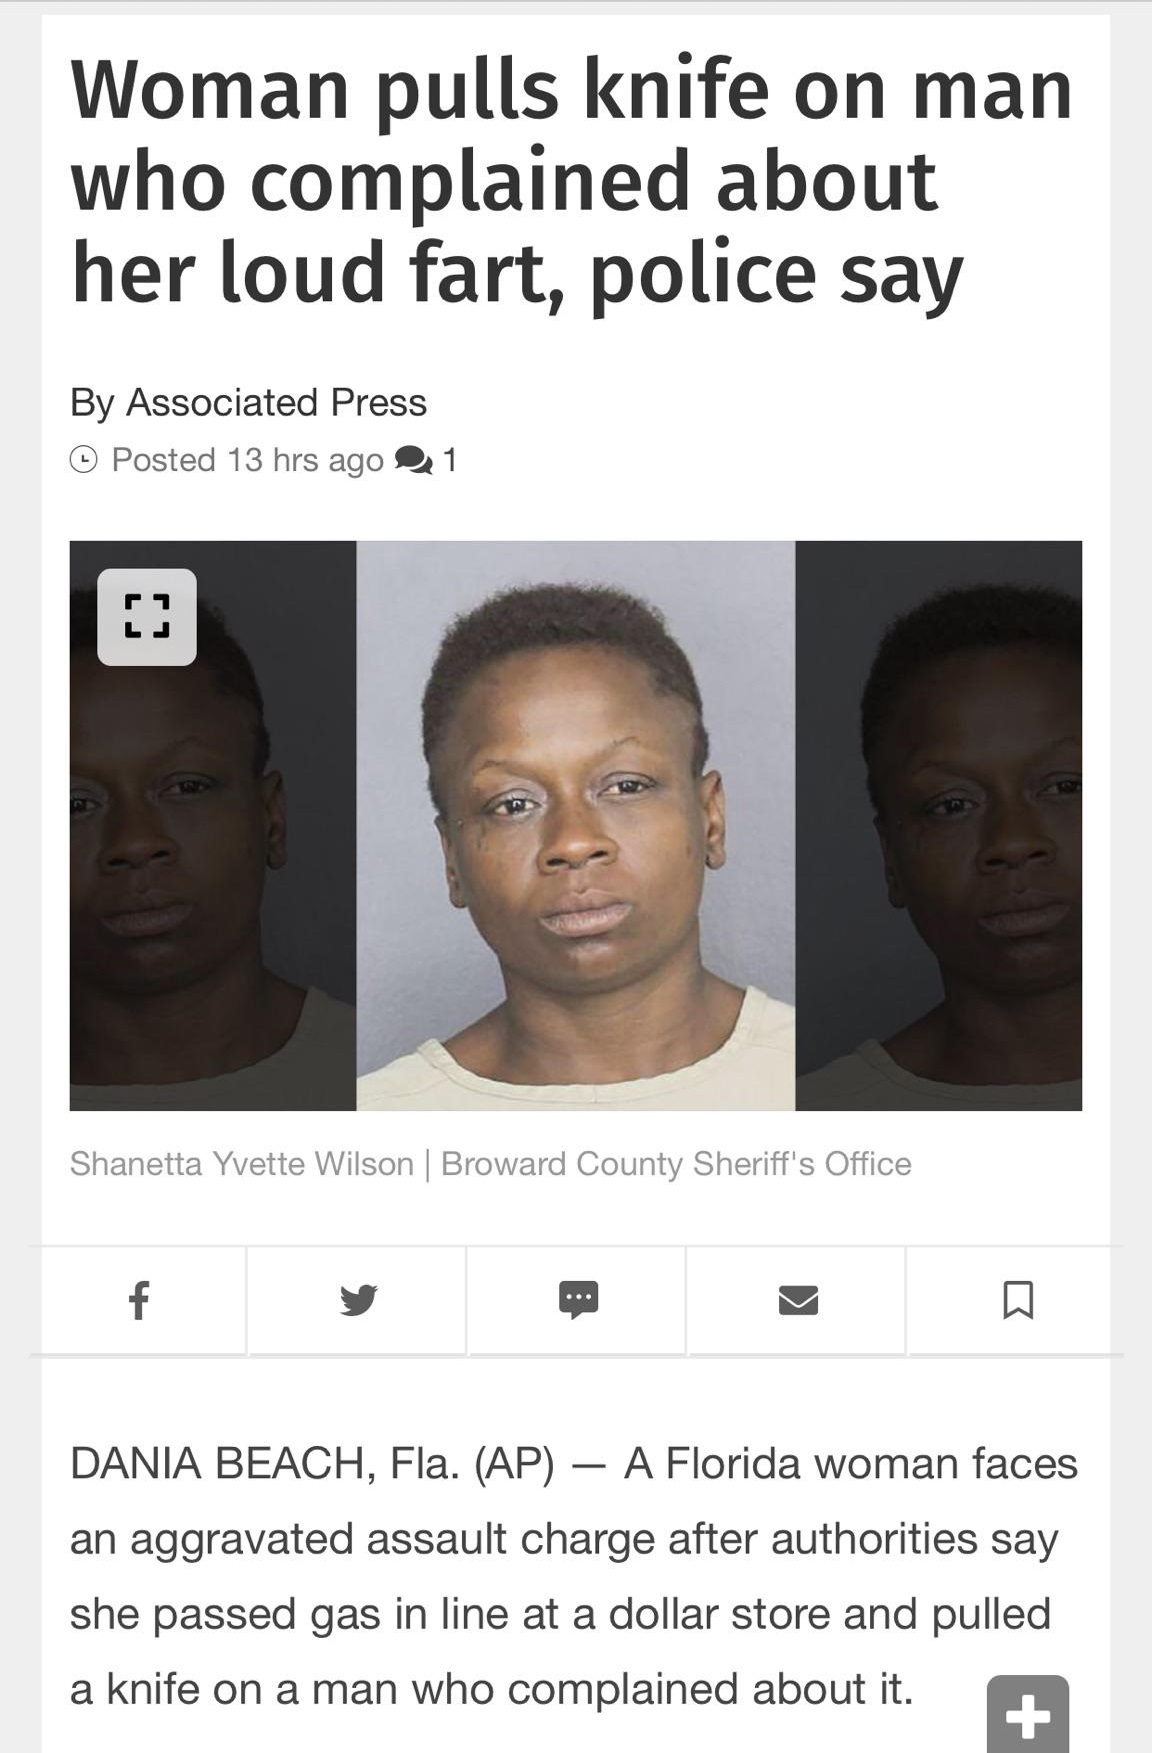 facial expression - Woman pulls knife on man who complained about her loud fart, police say By Associated Press Posted 13 hrs ago 21 Shanetta Yvette Wilson | Broward County Sheriff's Office Dania Beach, Fla. Ap A Florida woman faces an aggravated assault 